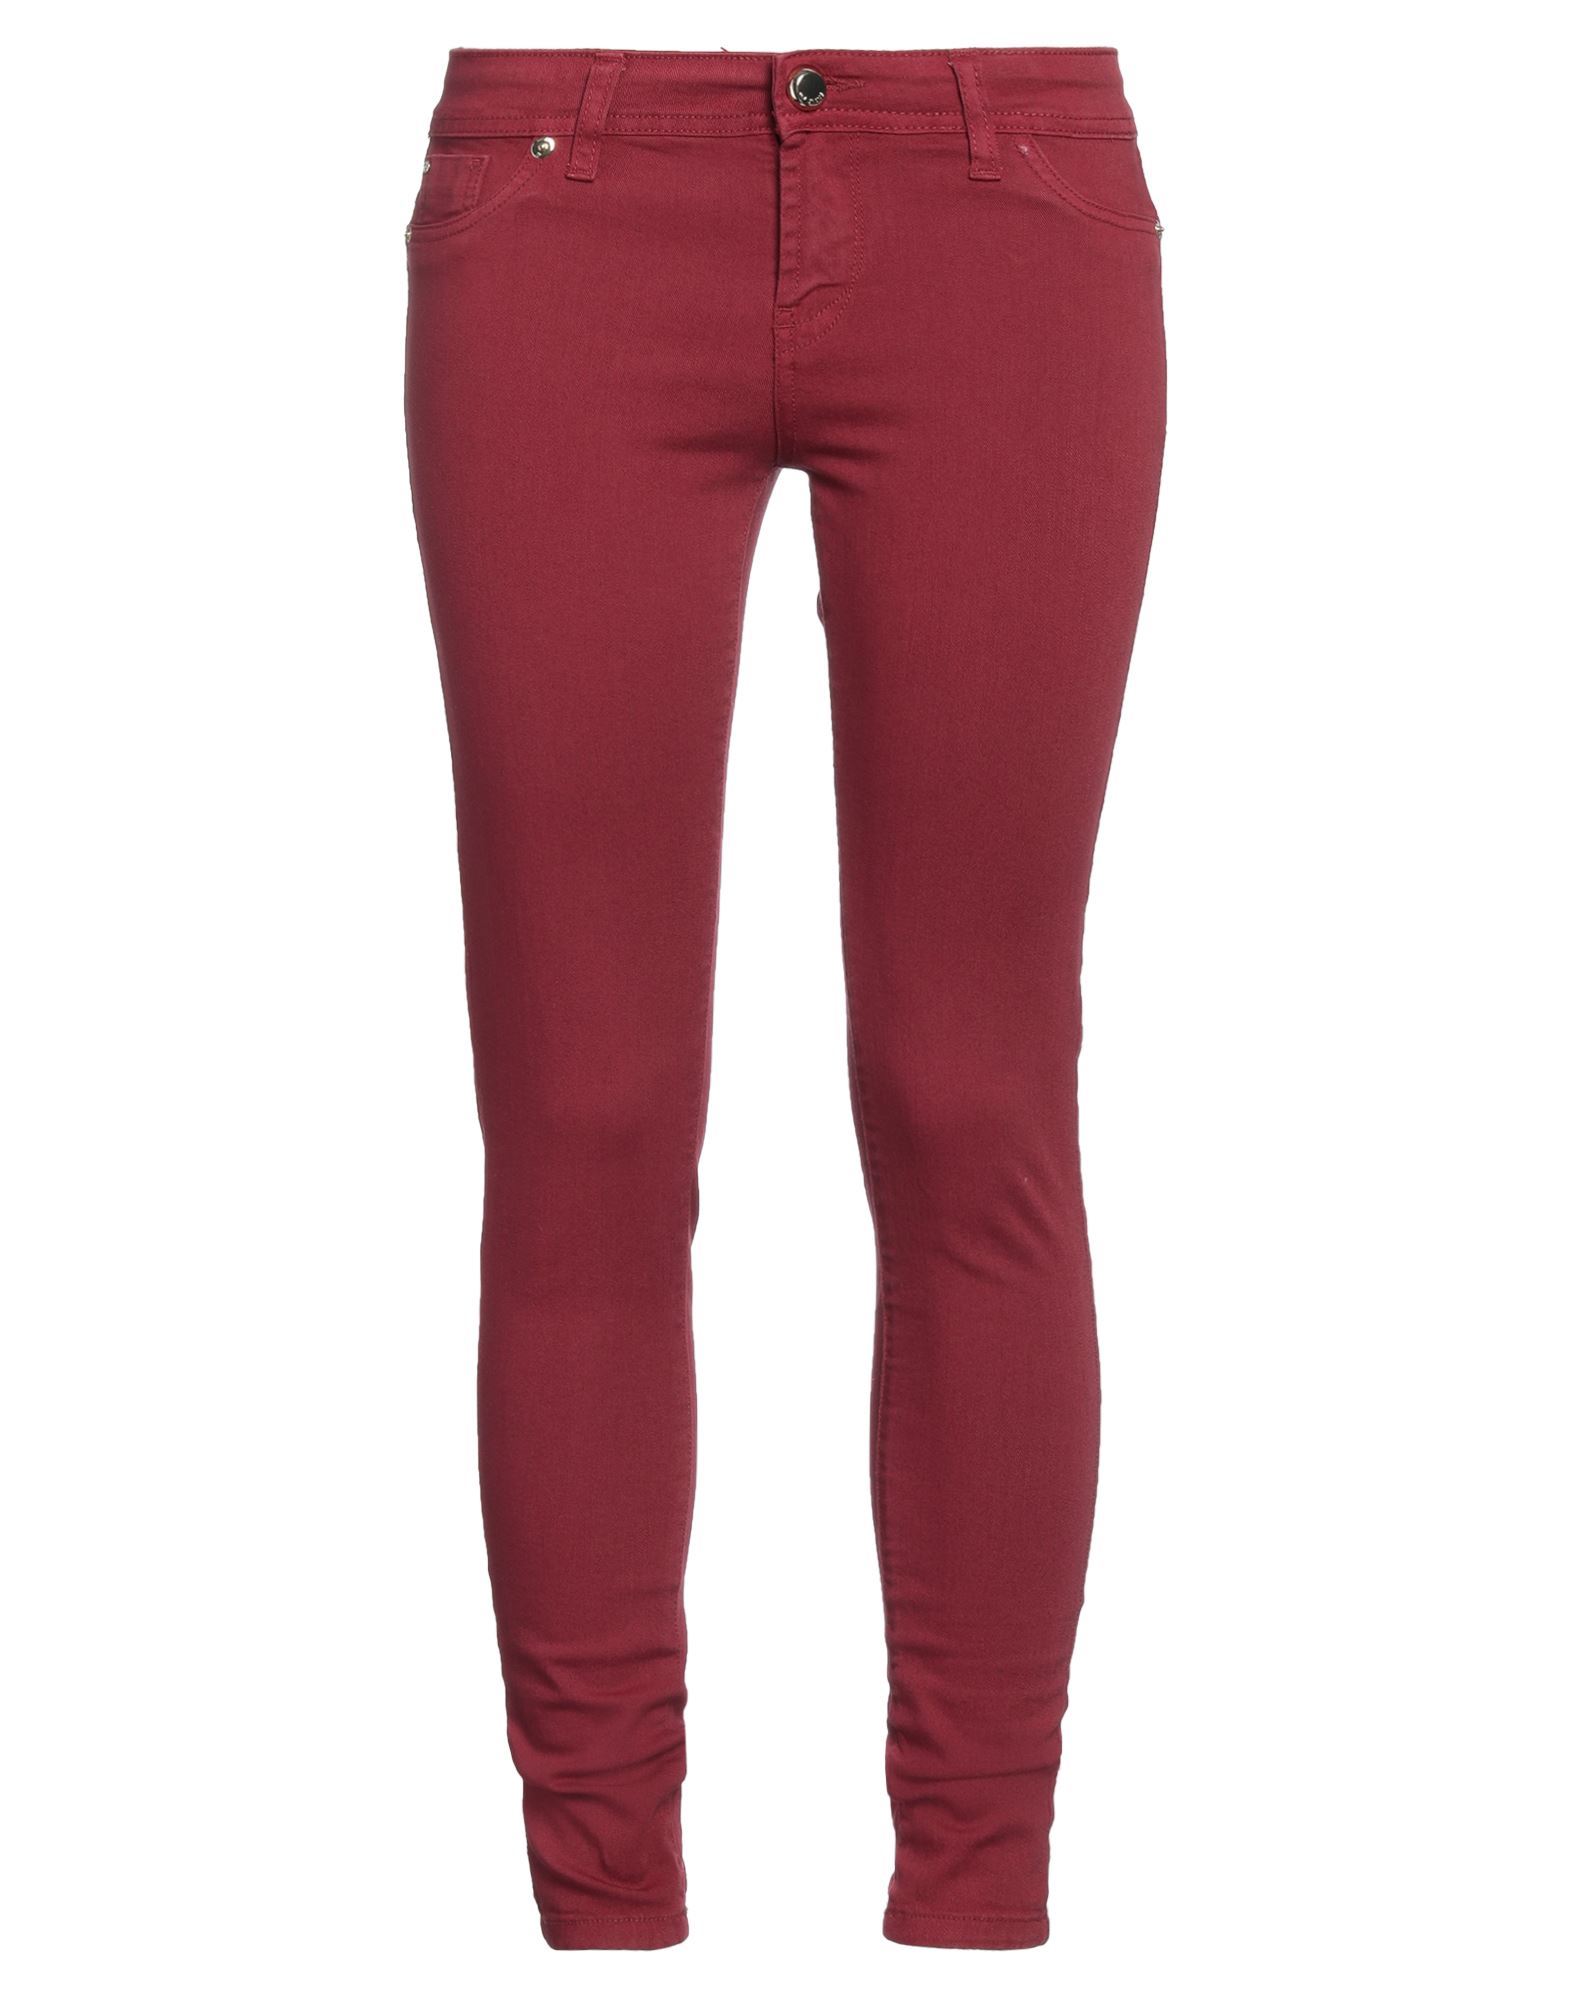 Gaudì Woman Jeans Burgundy Size 28 Cotton, Polyester, Elastane In Red